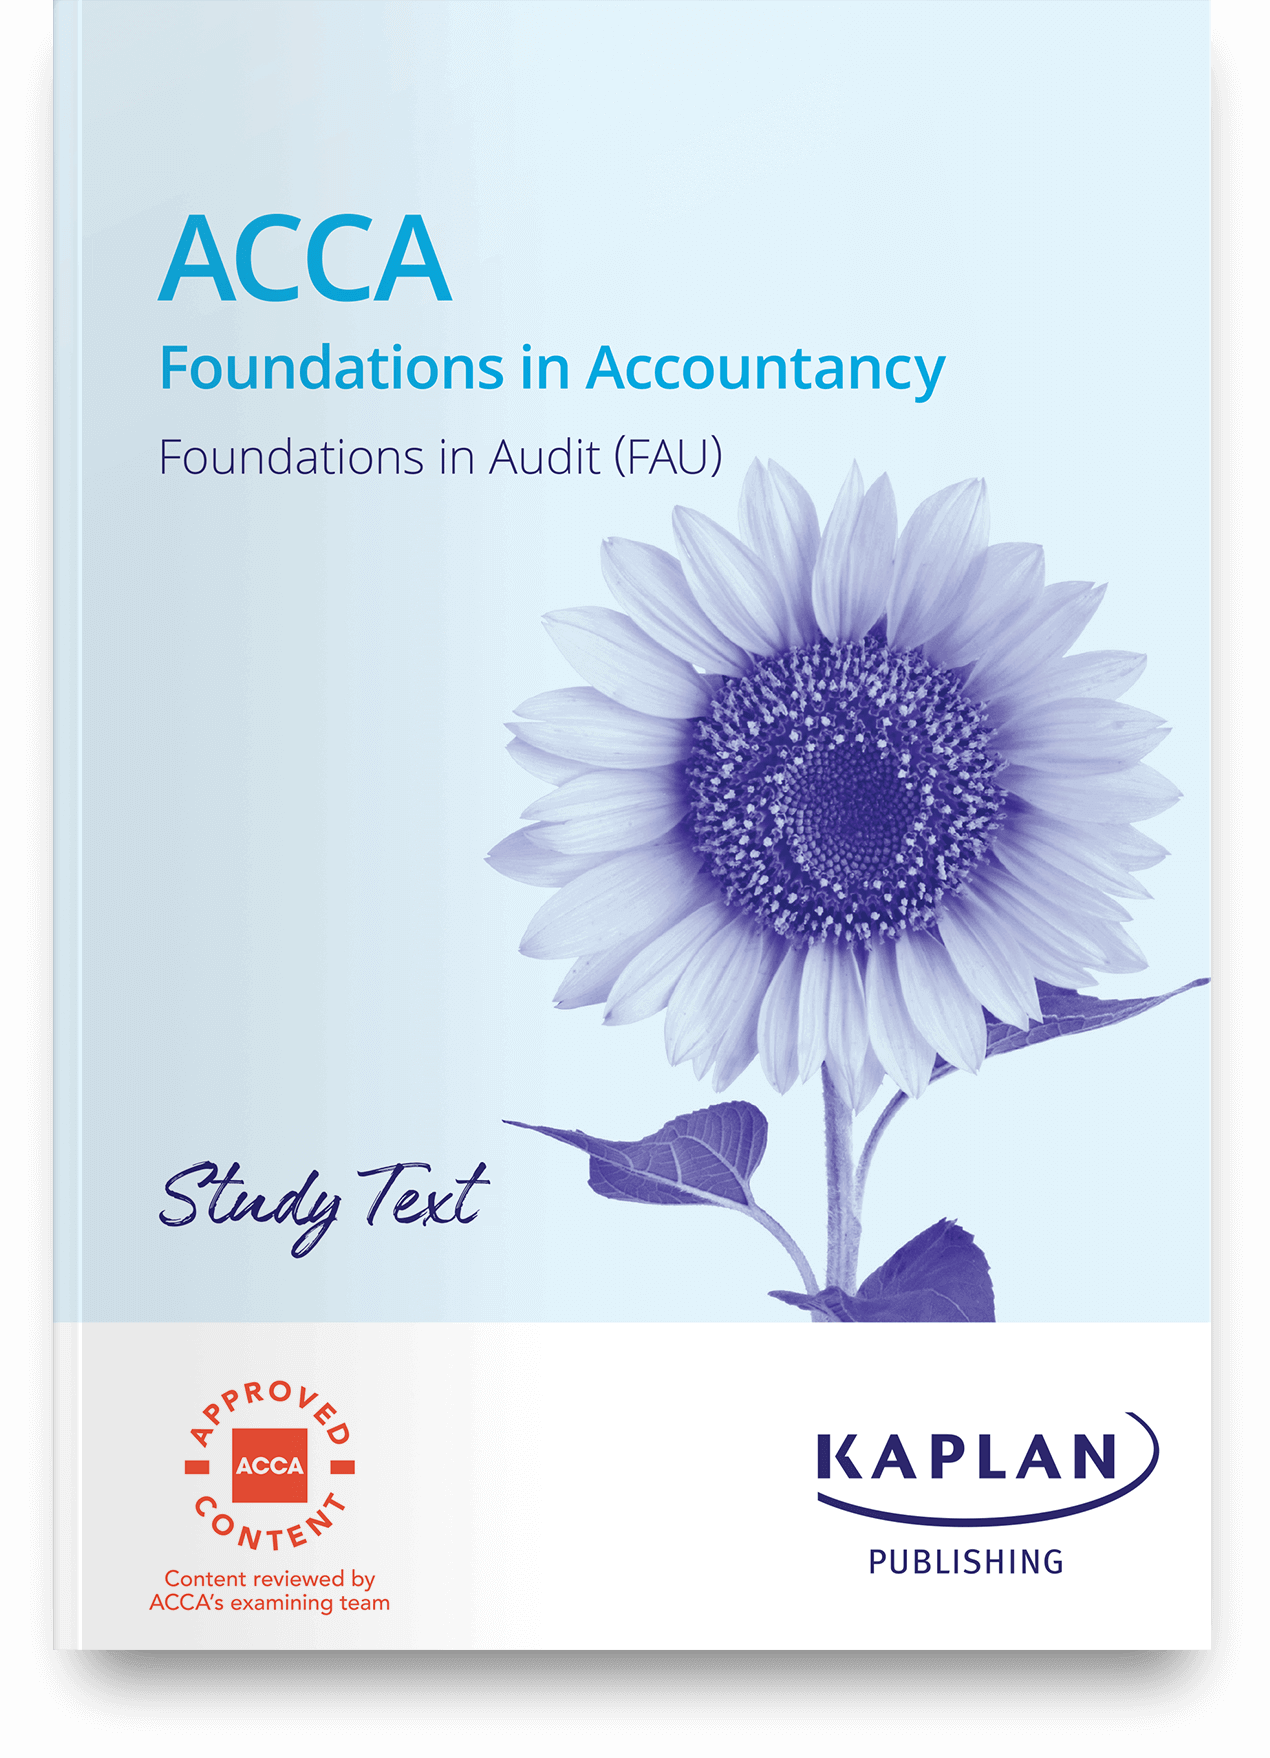 ACCA Foundations - Foundations in Audit (FAU) - Study Text